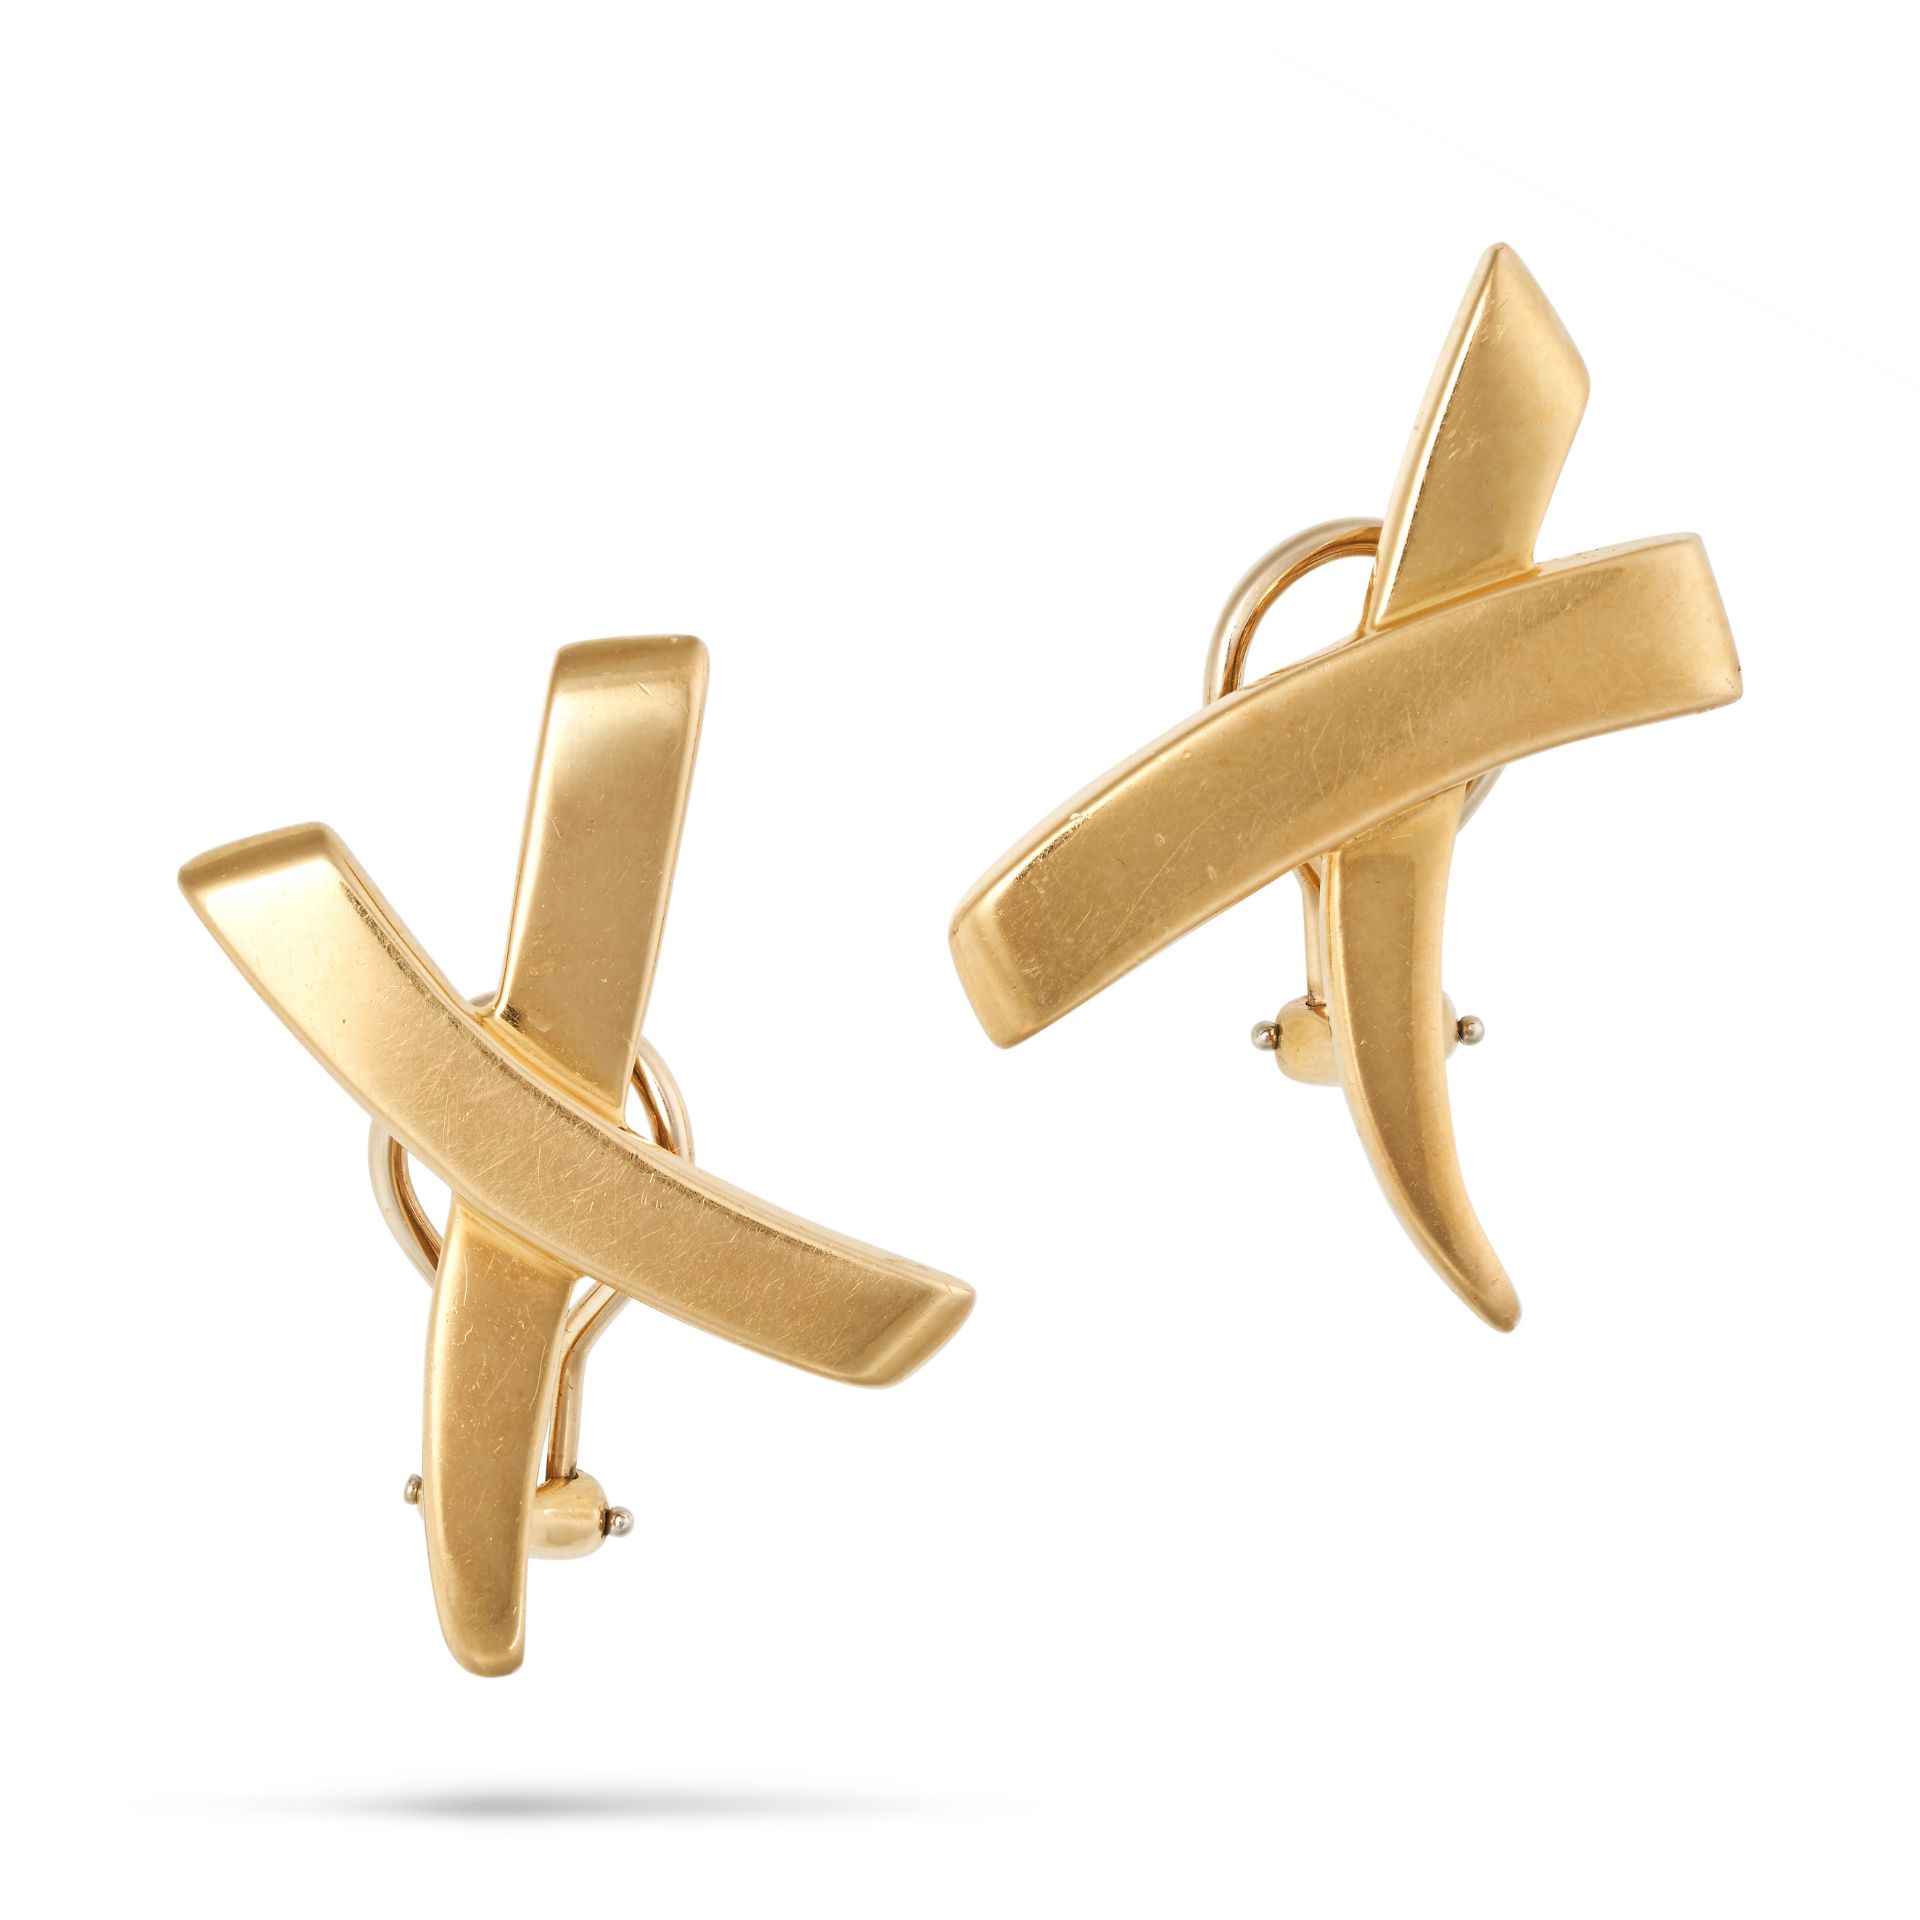 PALOMA PICASSO FOR TIFFANY & CO., A PAIR OF GOLD KISS EARRINGS, 1983 in 18ct yellow gold, each de...